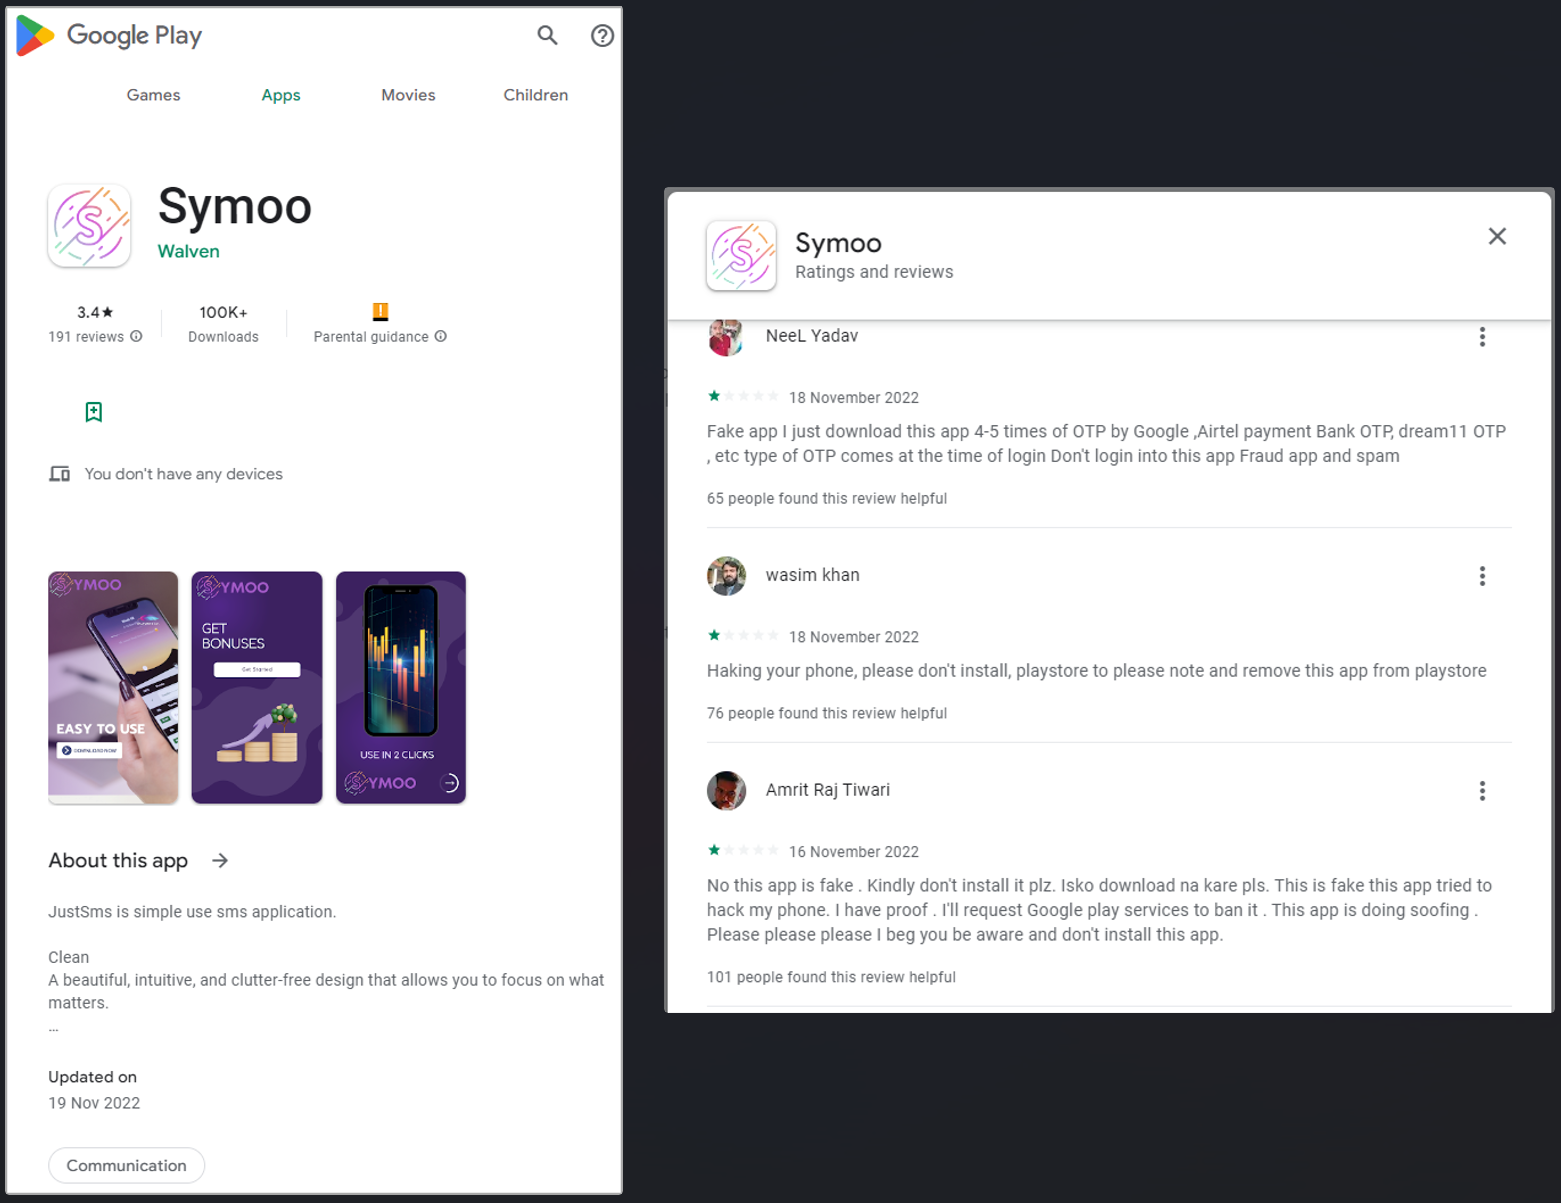 Symoo app and user reviews on Google Play